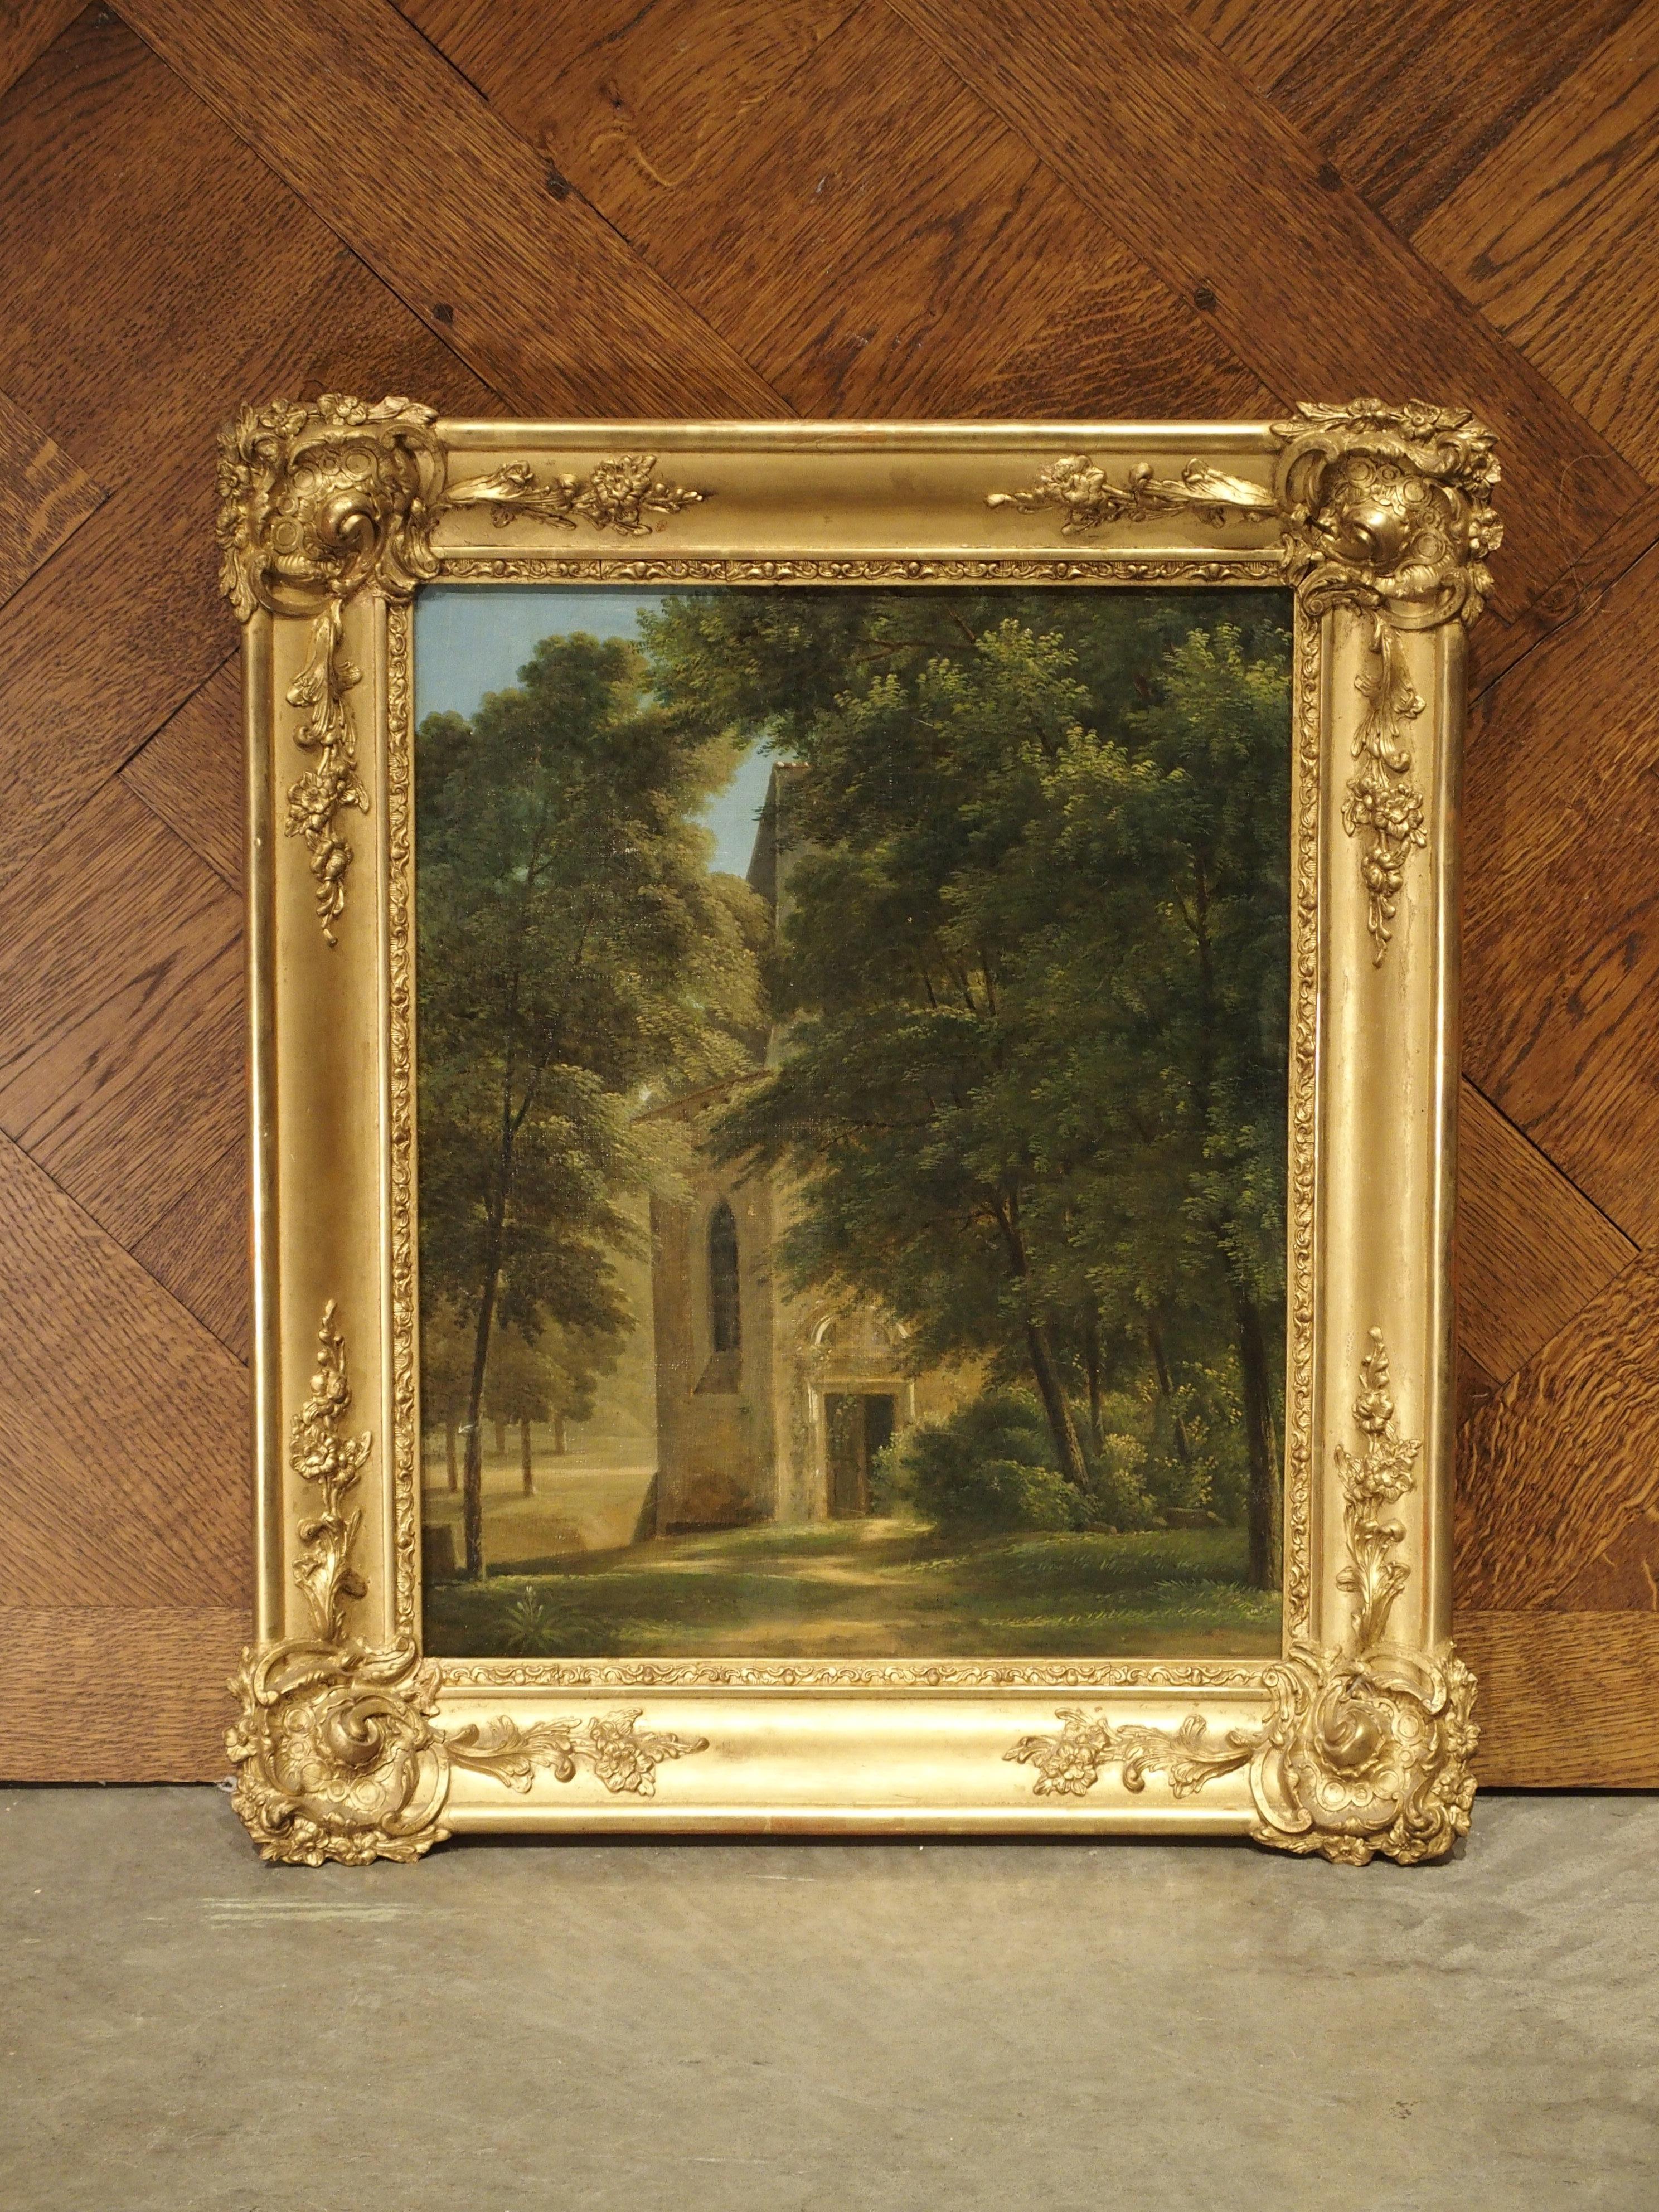 This small oil on canvas painting in a giltwood frame is of a stone chapel in a forest. The painting is from 19th century France and is attributed to the workshop Jean-Victor Bertin.

The chapel depicted in the painting is a multi-story church